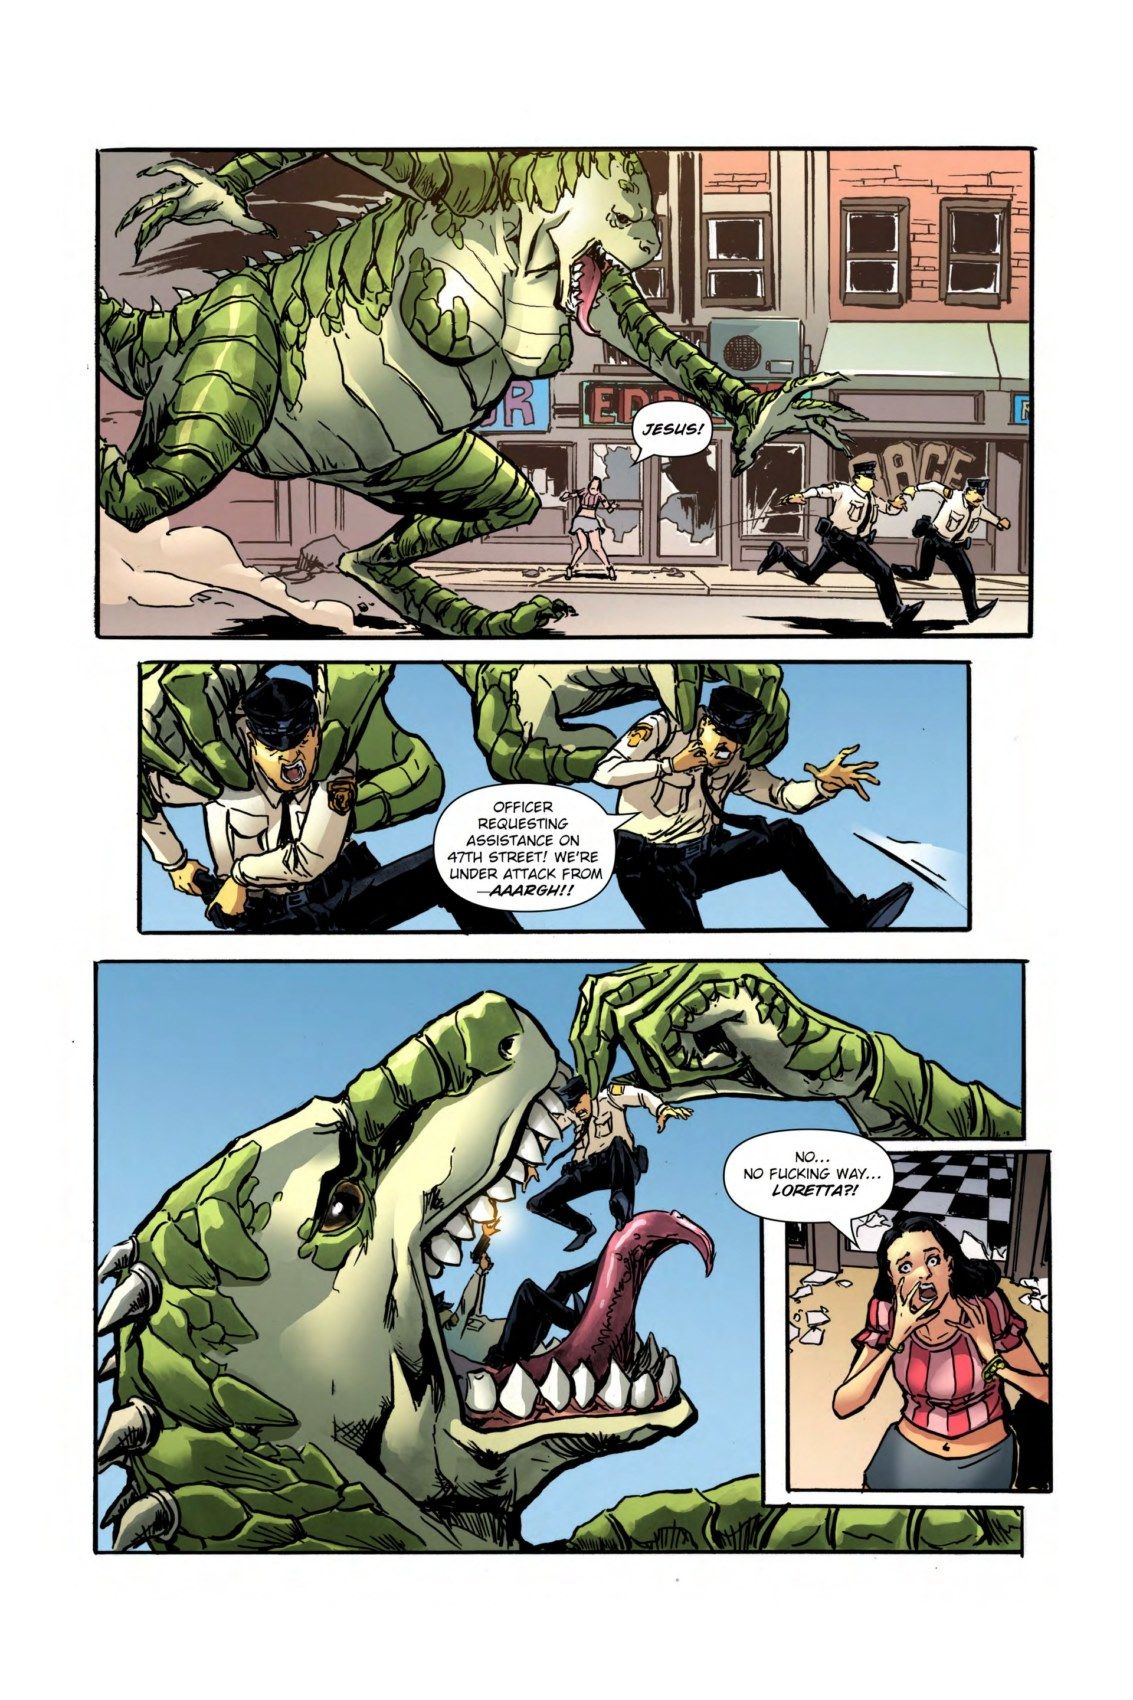 Colossal City Crush Issue 02 Transform Fan page 3